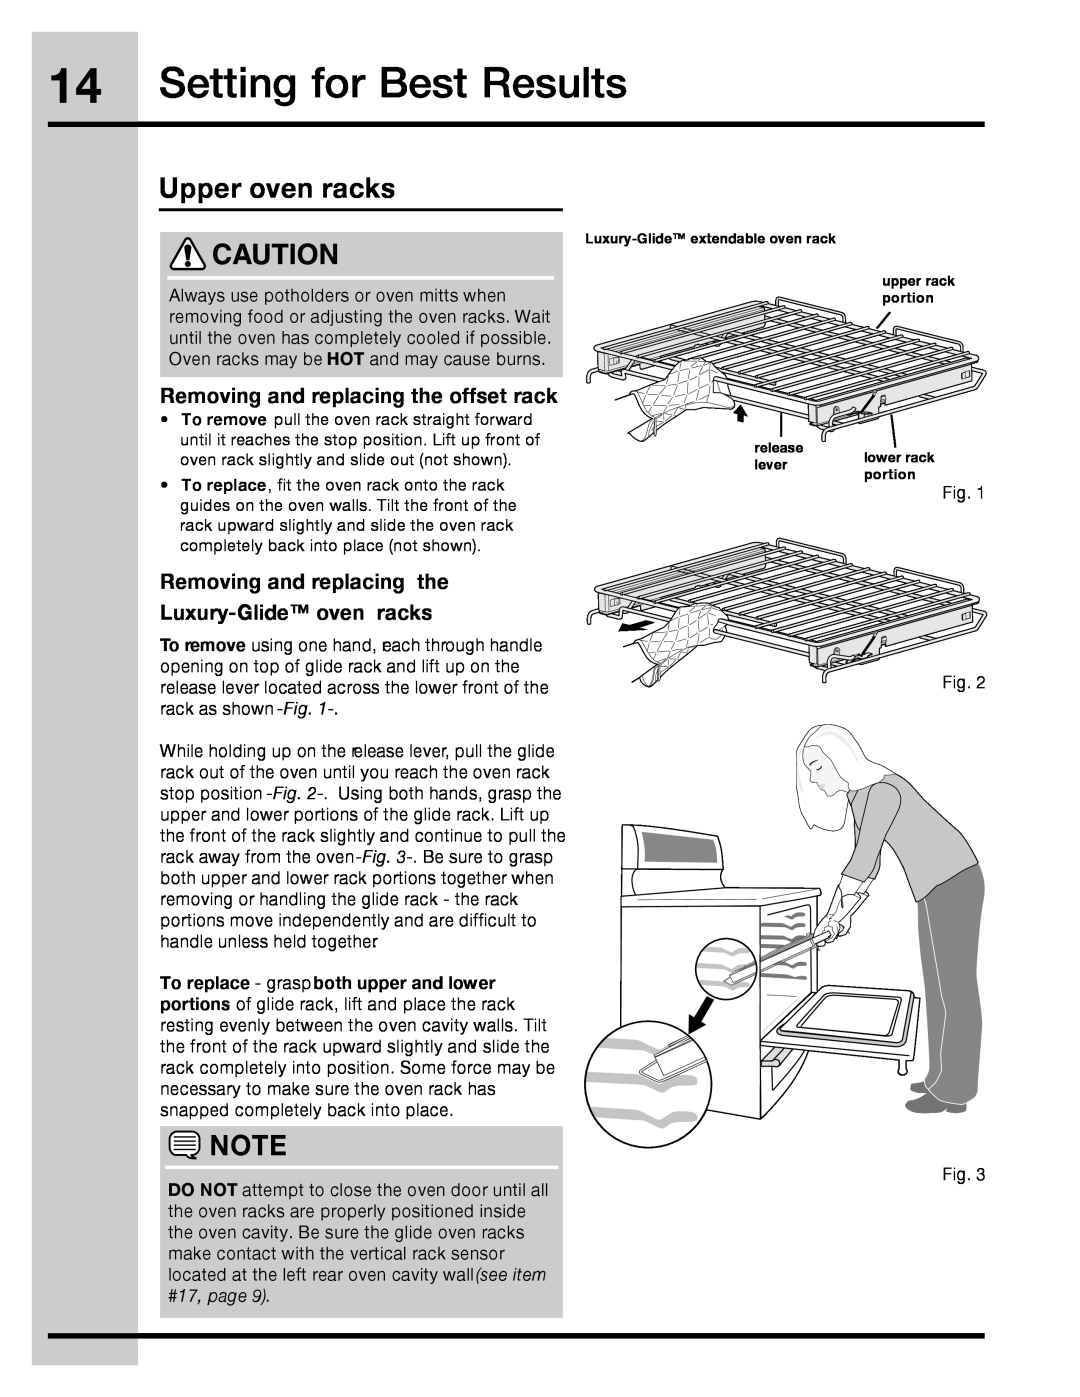 Electrolux 316471113 manual Setting for Best Results, Removing and replacing the offset rack, Upper oven racks 